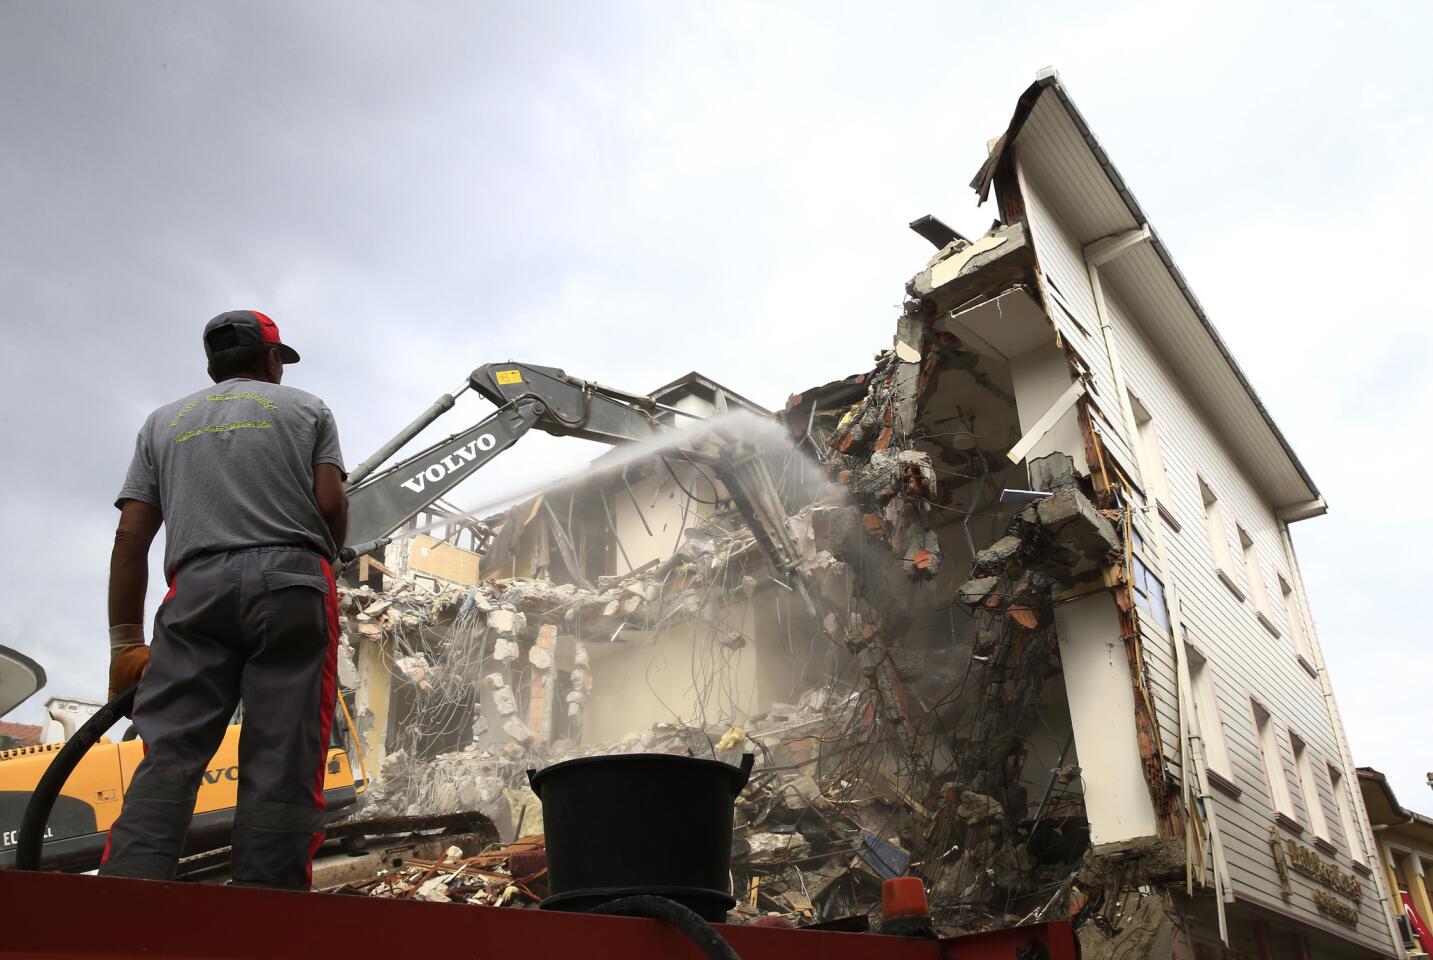 Workers in Istanbul demolish the Halit Pasa Residence hotel on July 20, 2016. According to the state-run Anadolu news agency, the hotel was allegedly the meeting point of the plotters who planned the failed July 15 coup.